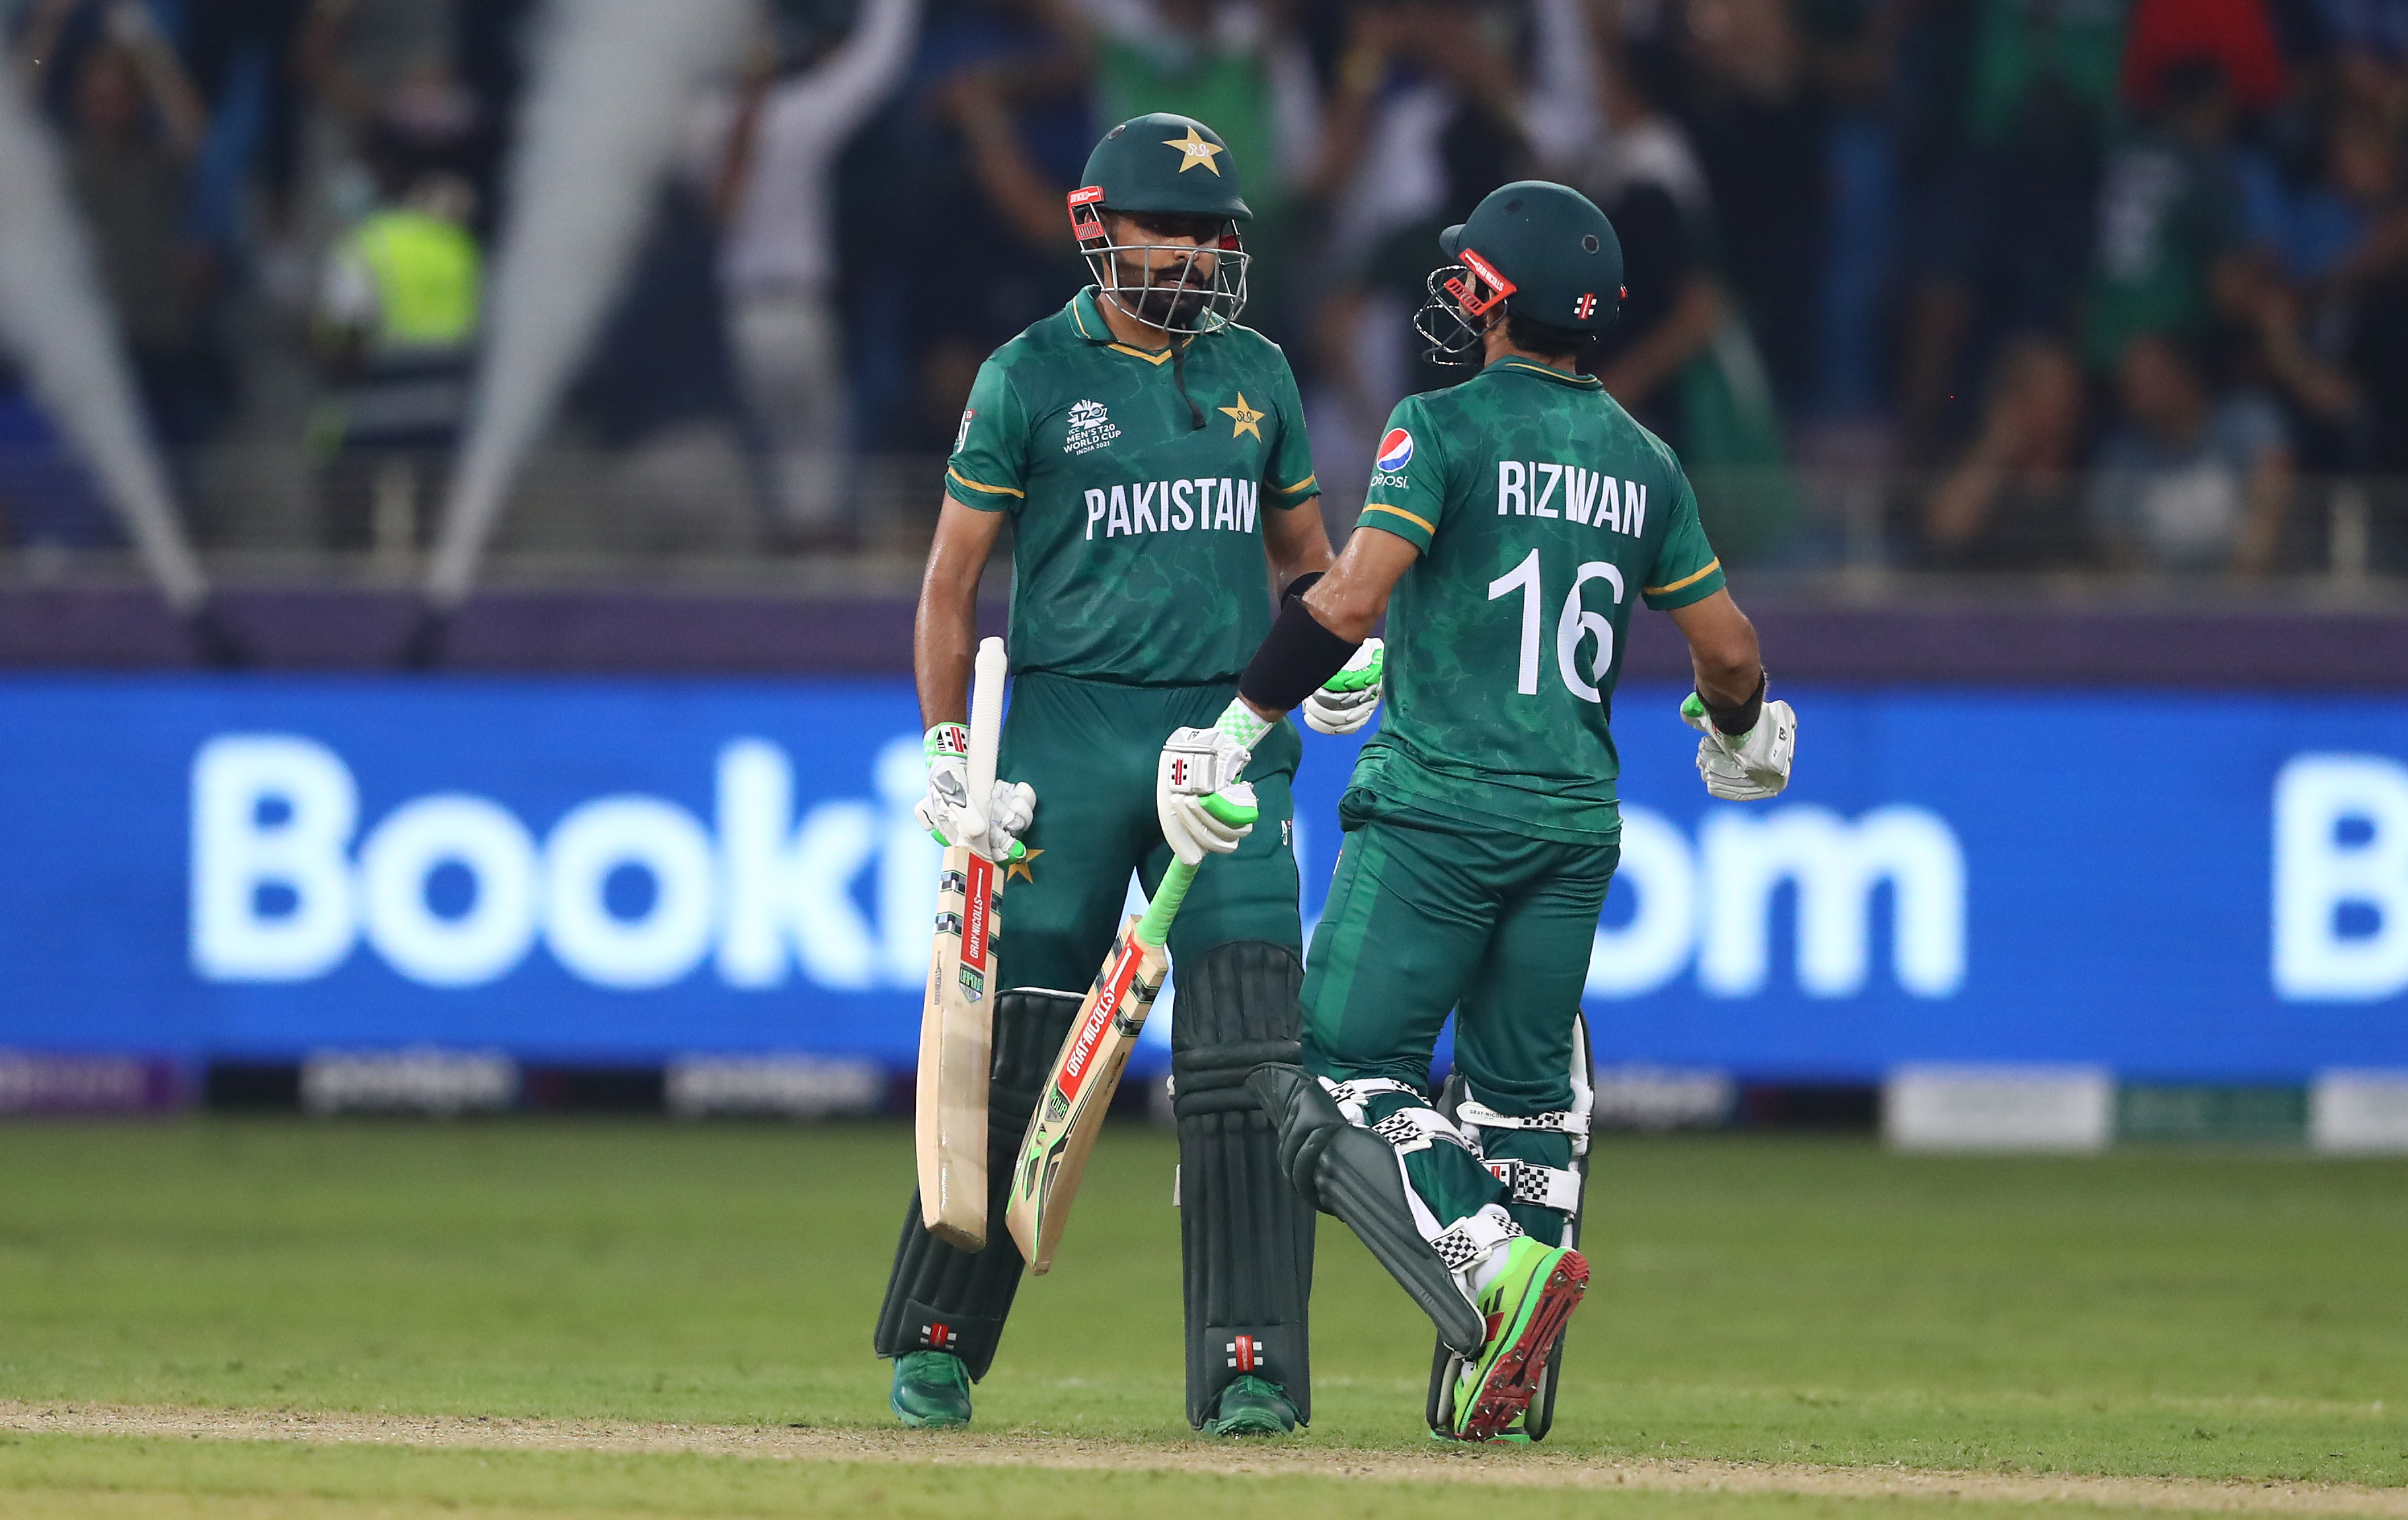 Pakistan must work on their batting to yield rich dividends at T20 World Cup 2022